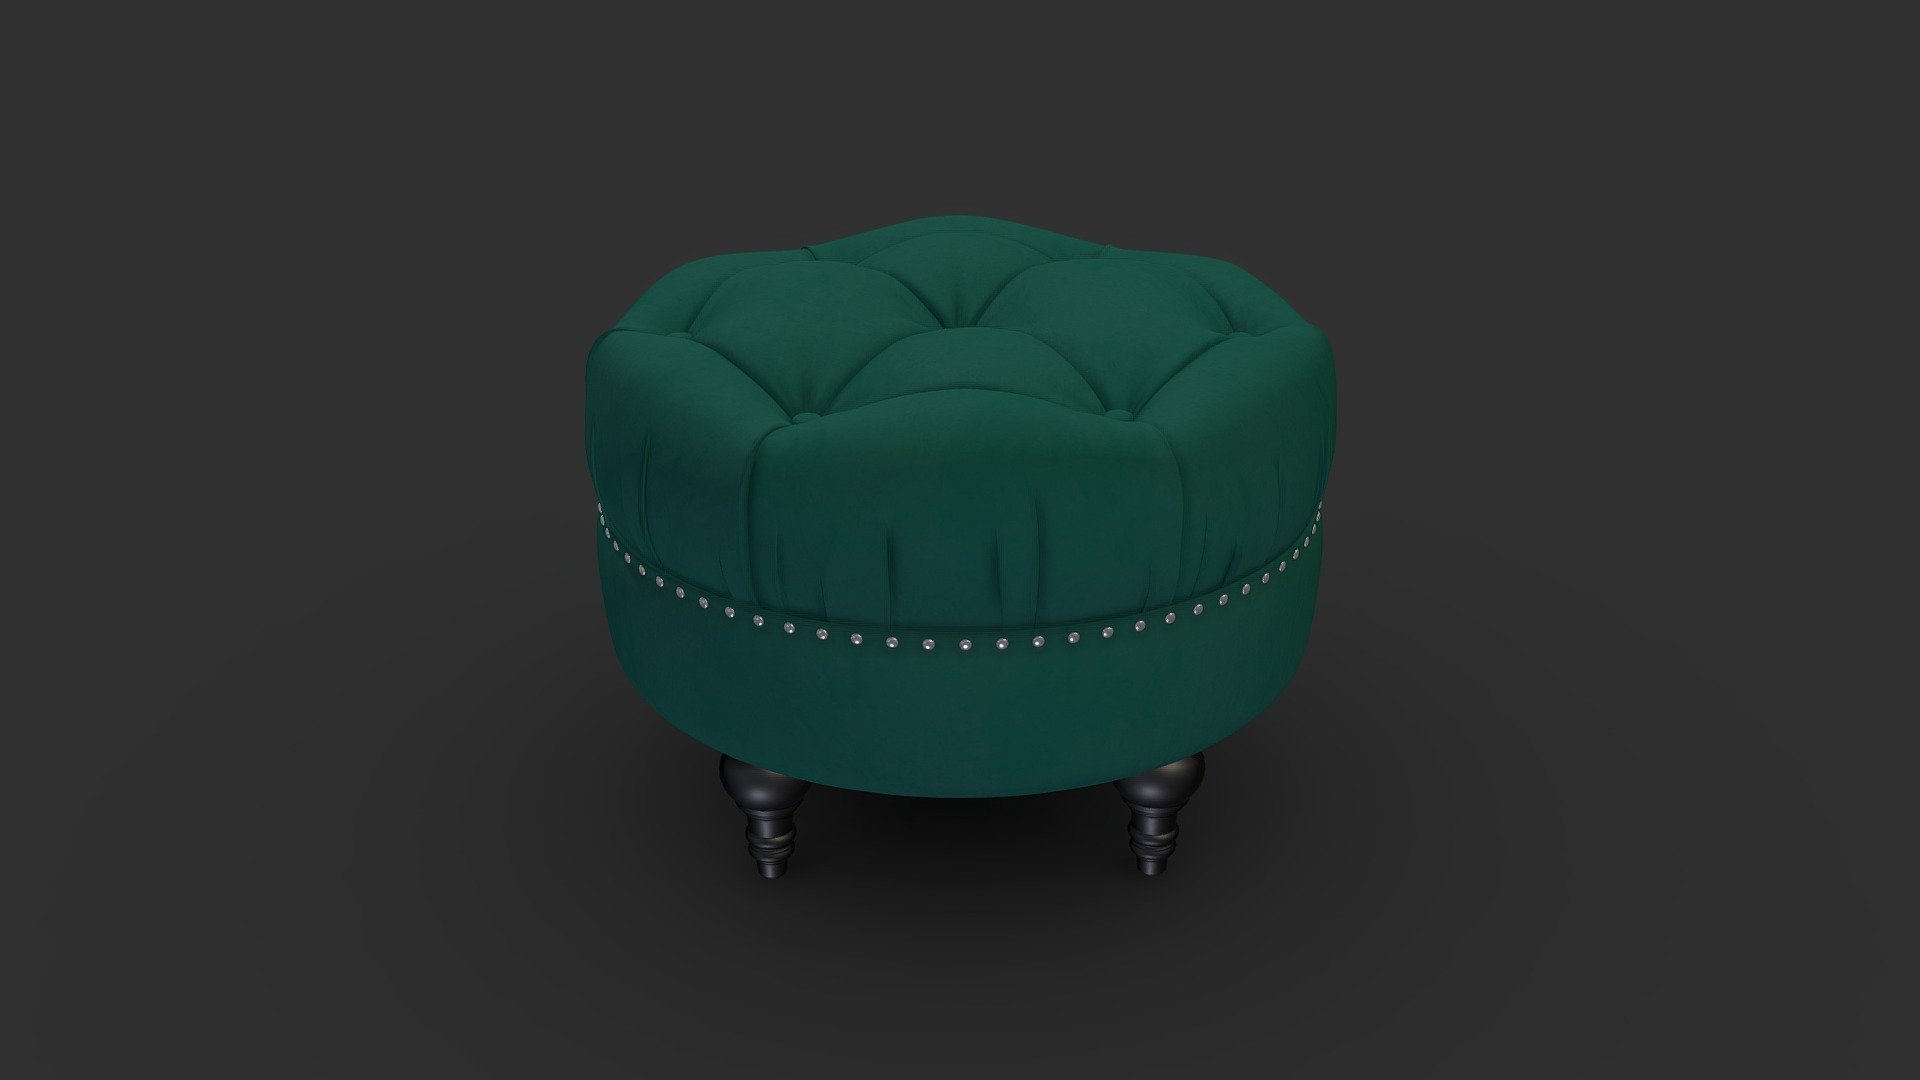 Dawn Tufted Round Ottoman from Jennifer Taylor Home Collection

Dimensions: 

W 635 x D 635 x H 457 mm

Model link: https://3dsky.org/3dmodels/show/dawn_tufted_round_ottoman

Tags: contemporary, modern, burgundy, evergreen, velvet, chesterfiled, classic, american, nailhead, pouf, stool - Dawn Tufted Round Ottoman - Evergreen - Buy Royalty Free 3D model by RC3D (@rc.3d) 3d model